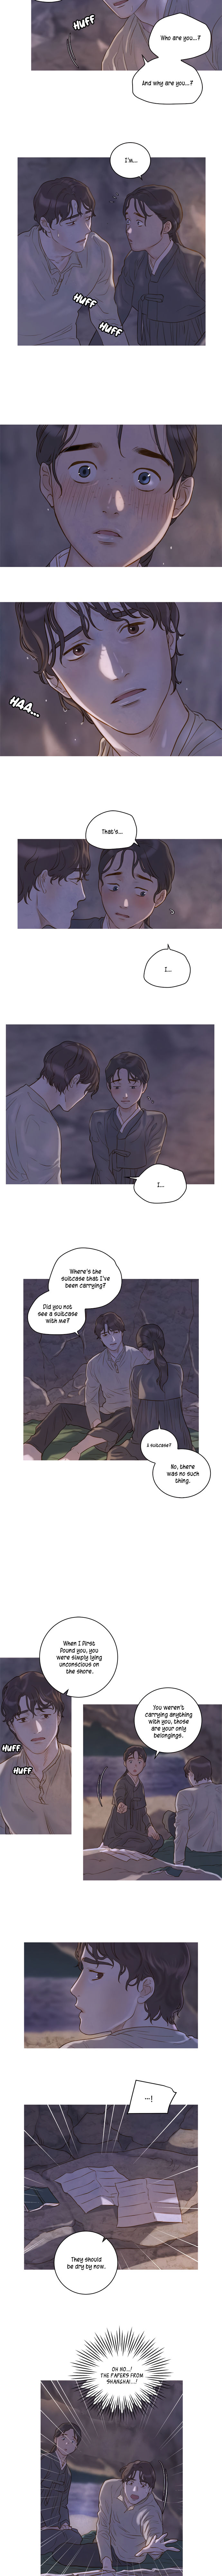 Gorae Byul - The Gyeongseong Mermaid - Chapter 3 Page 2